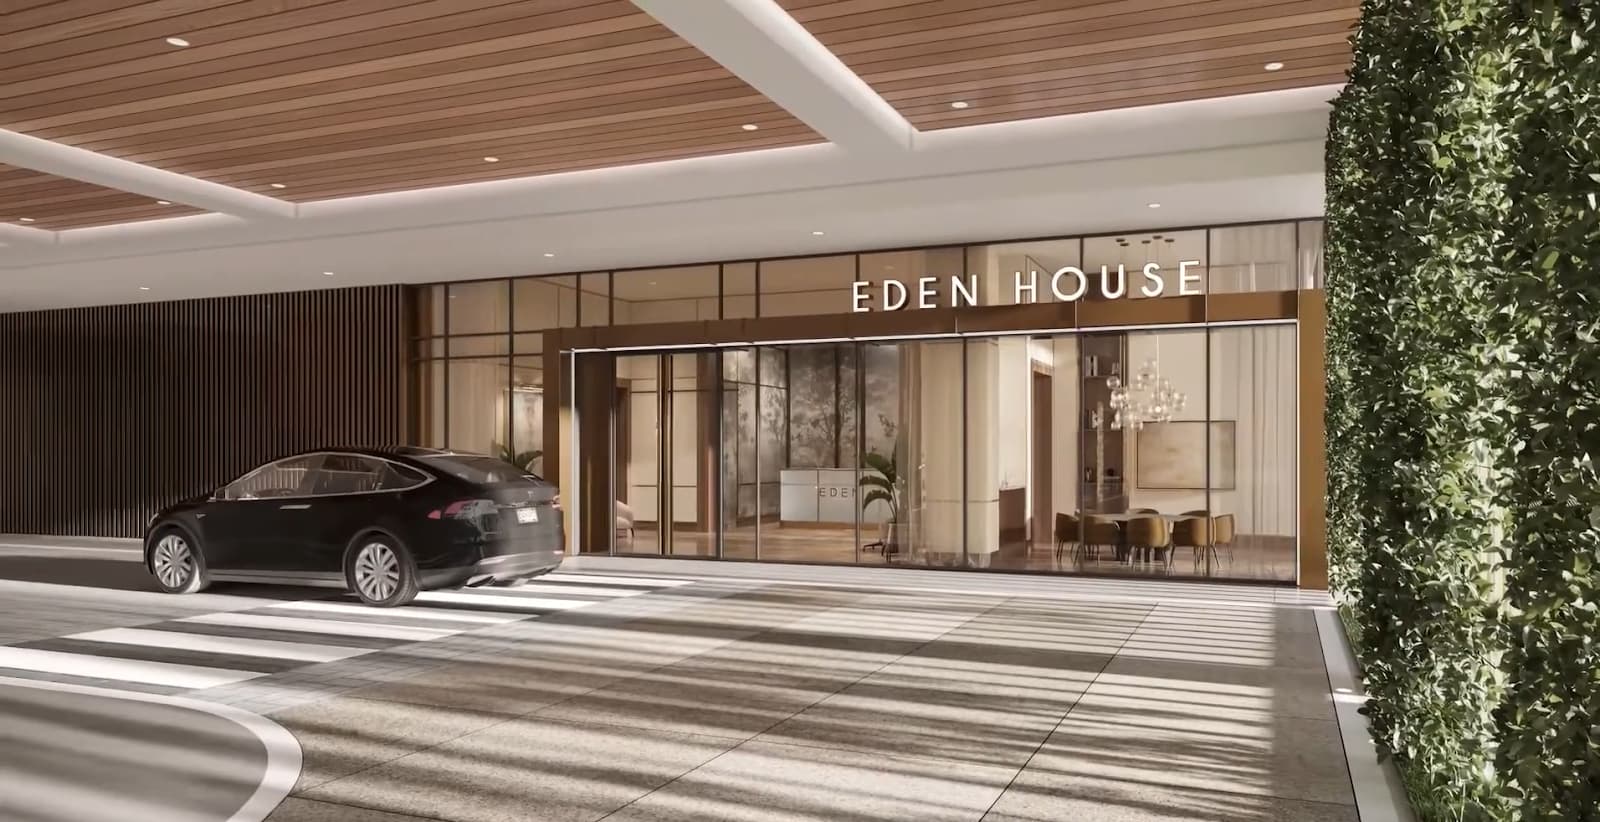 A luxury building entrance labeled "EDEN HOUSE" with a car out front